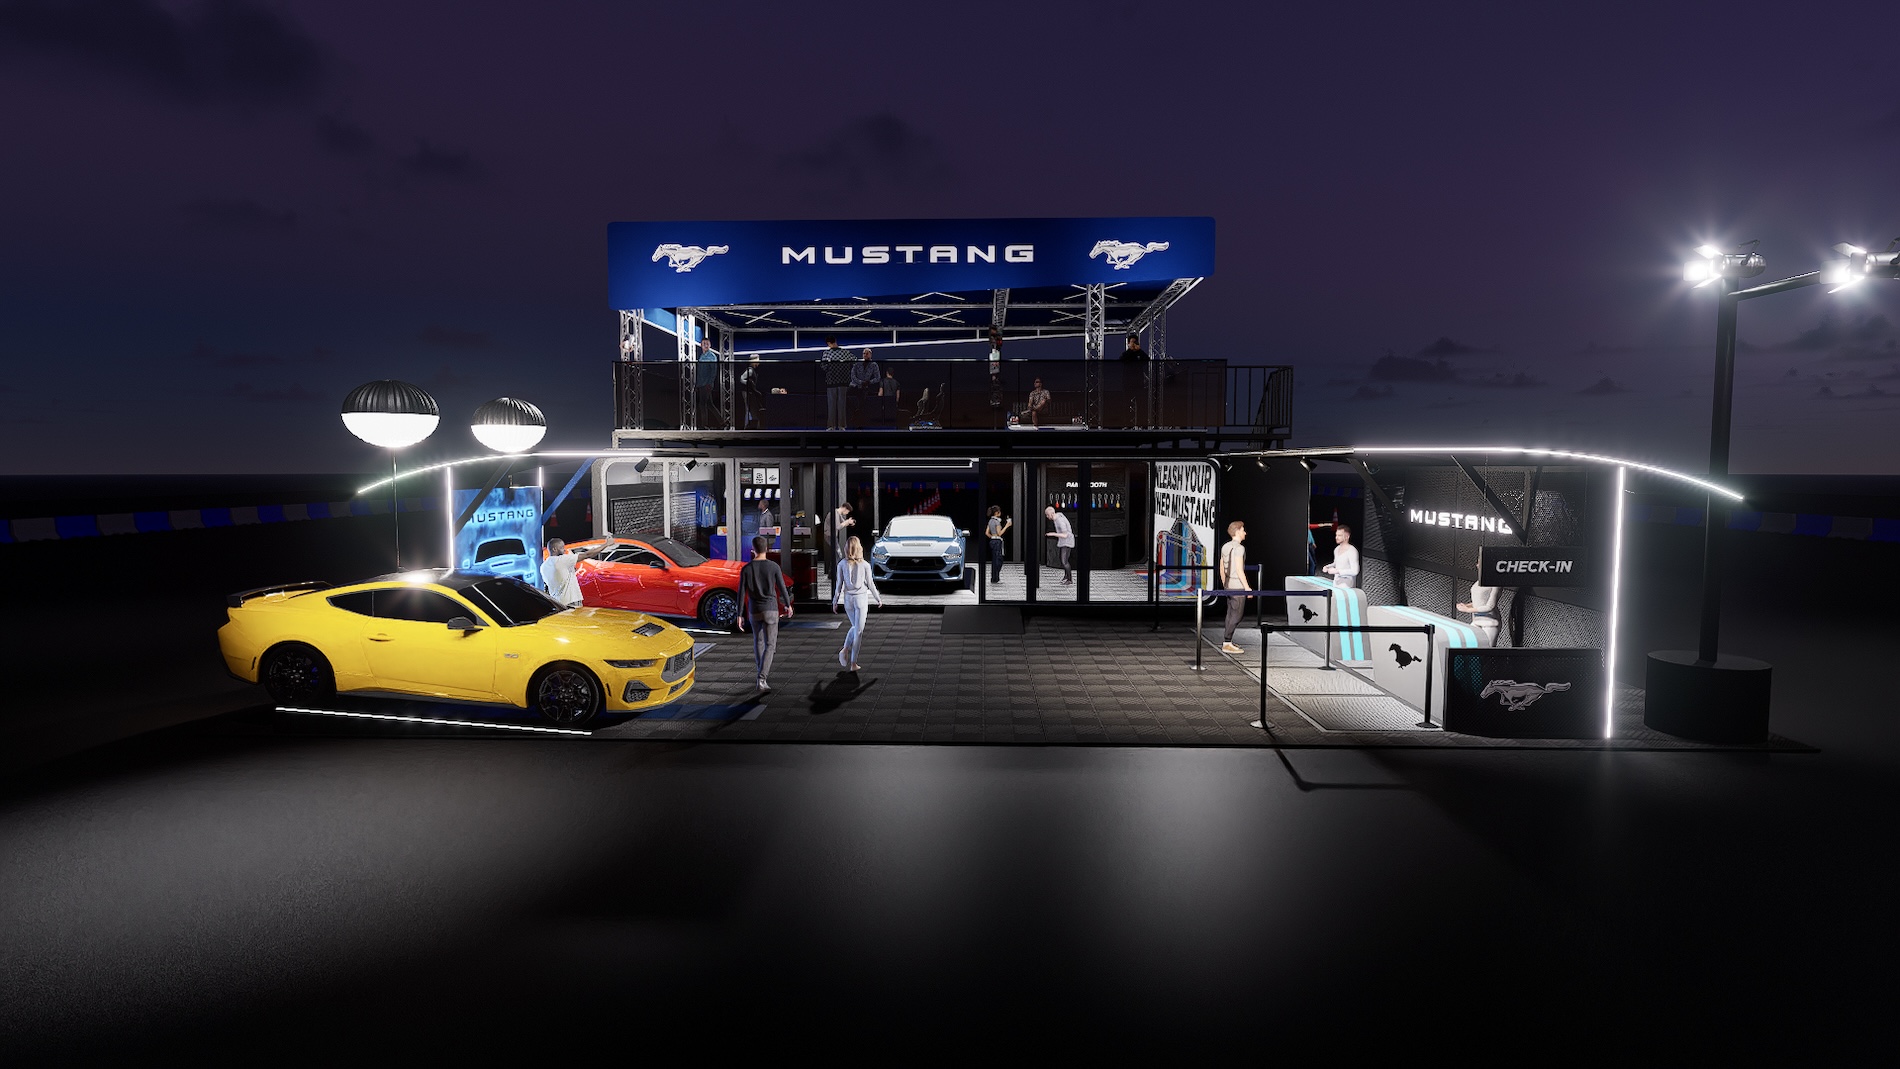 S650 Mustang "Mustang Unleashed" national demo tour announced to celebrate Mustang's 60th Birthday. Registration now open Mustang Unleashed Render 2